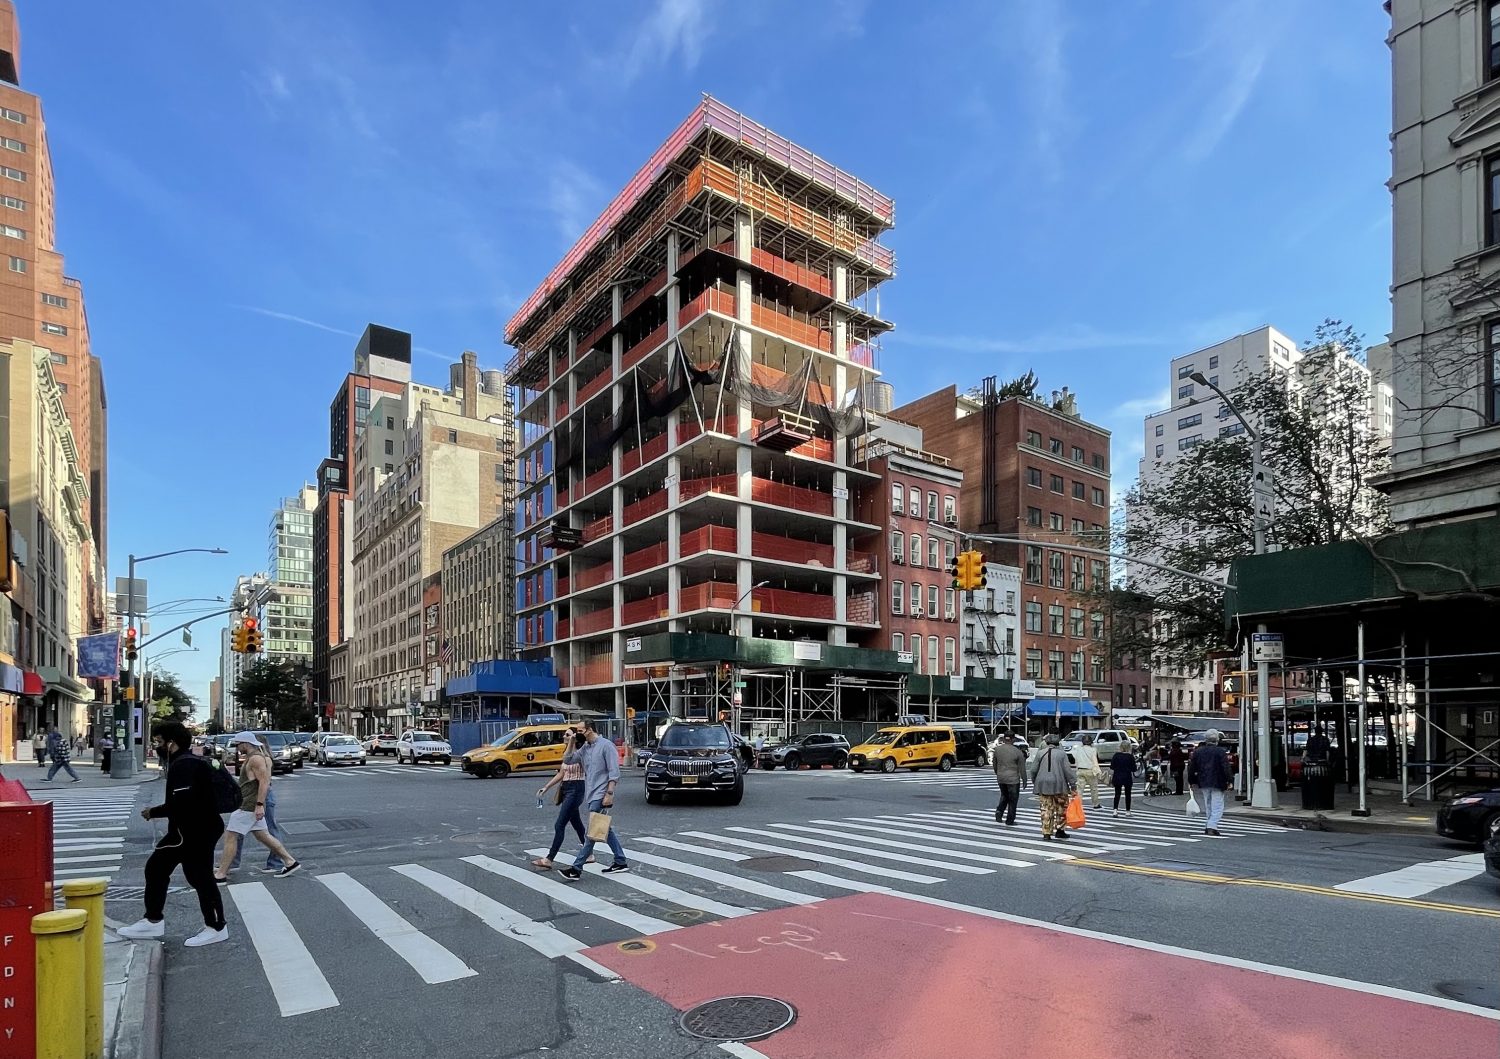 202 East 23rd Streets Superstructure Reaches Halfway Mark In Kips Bay